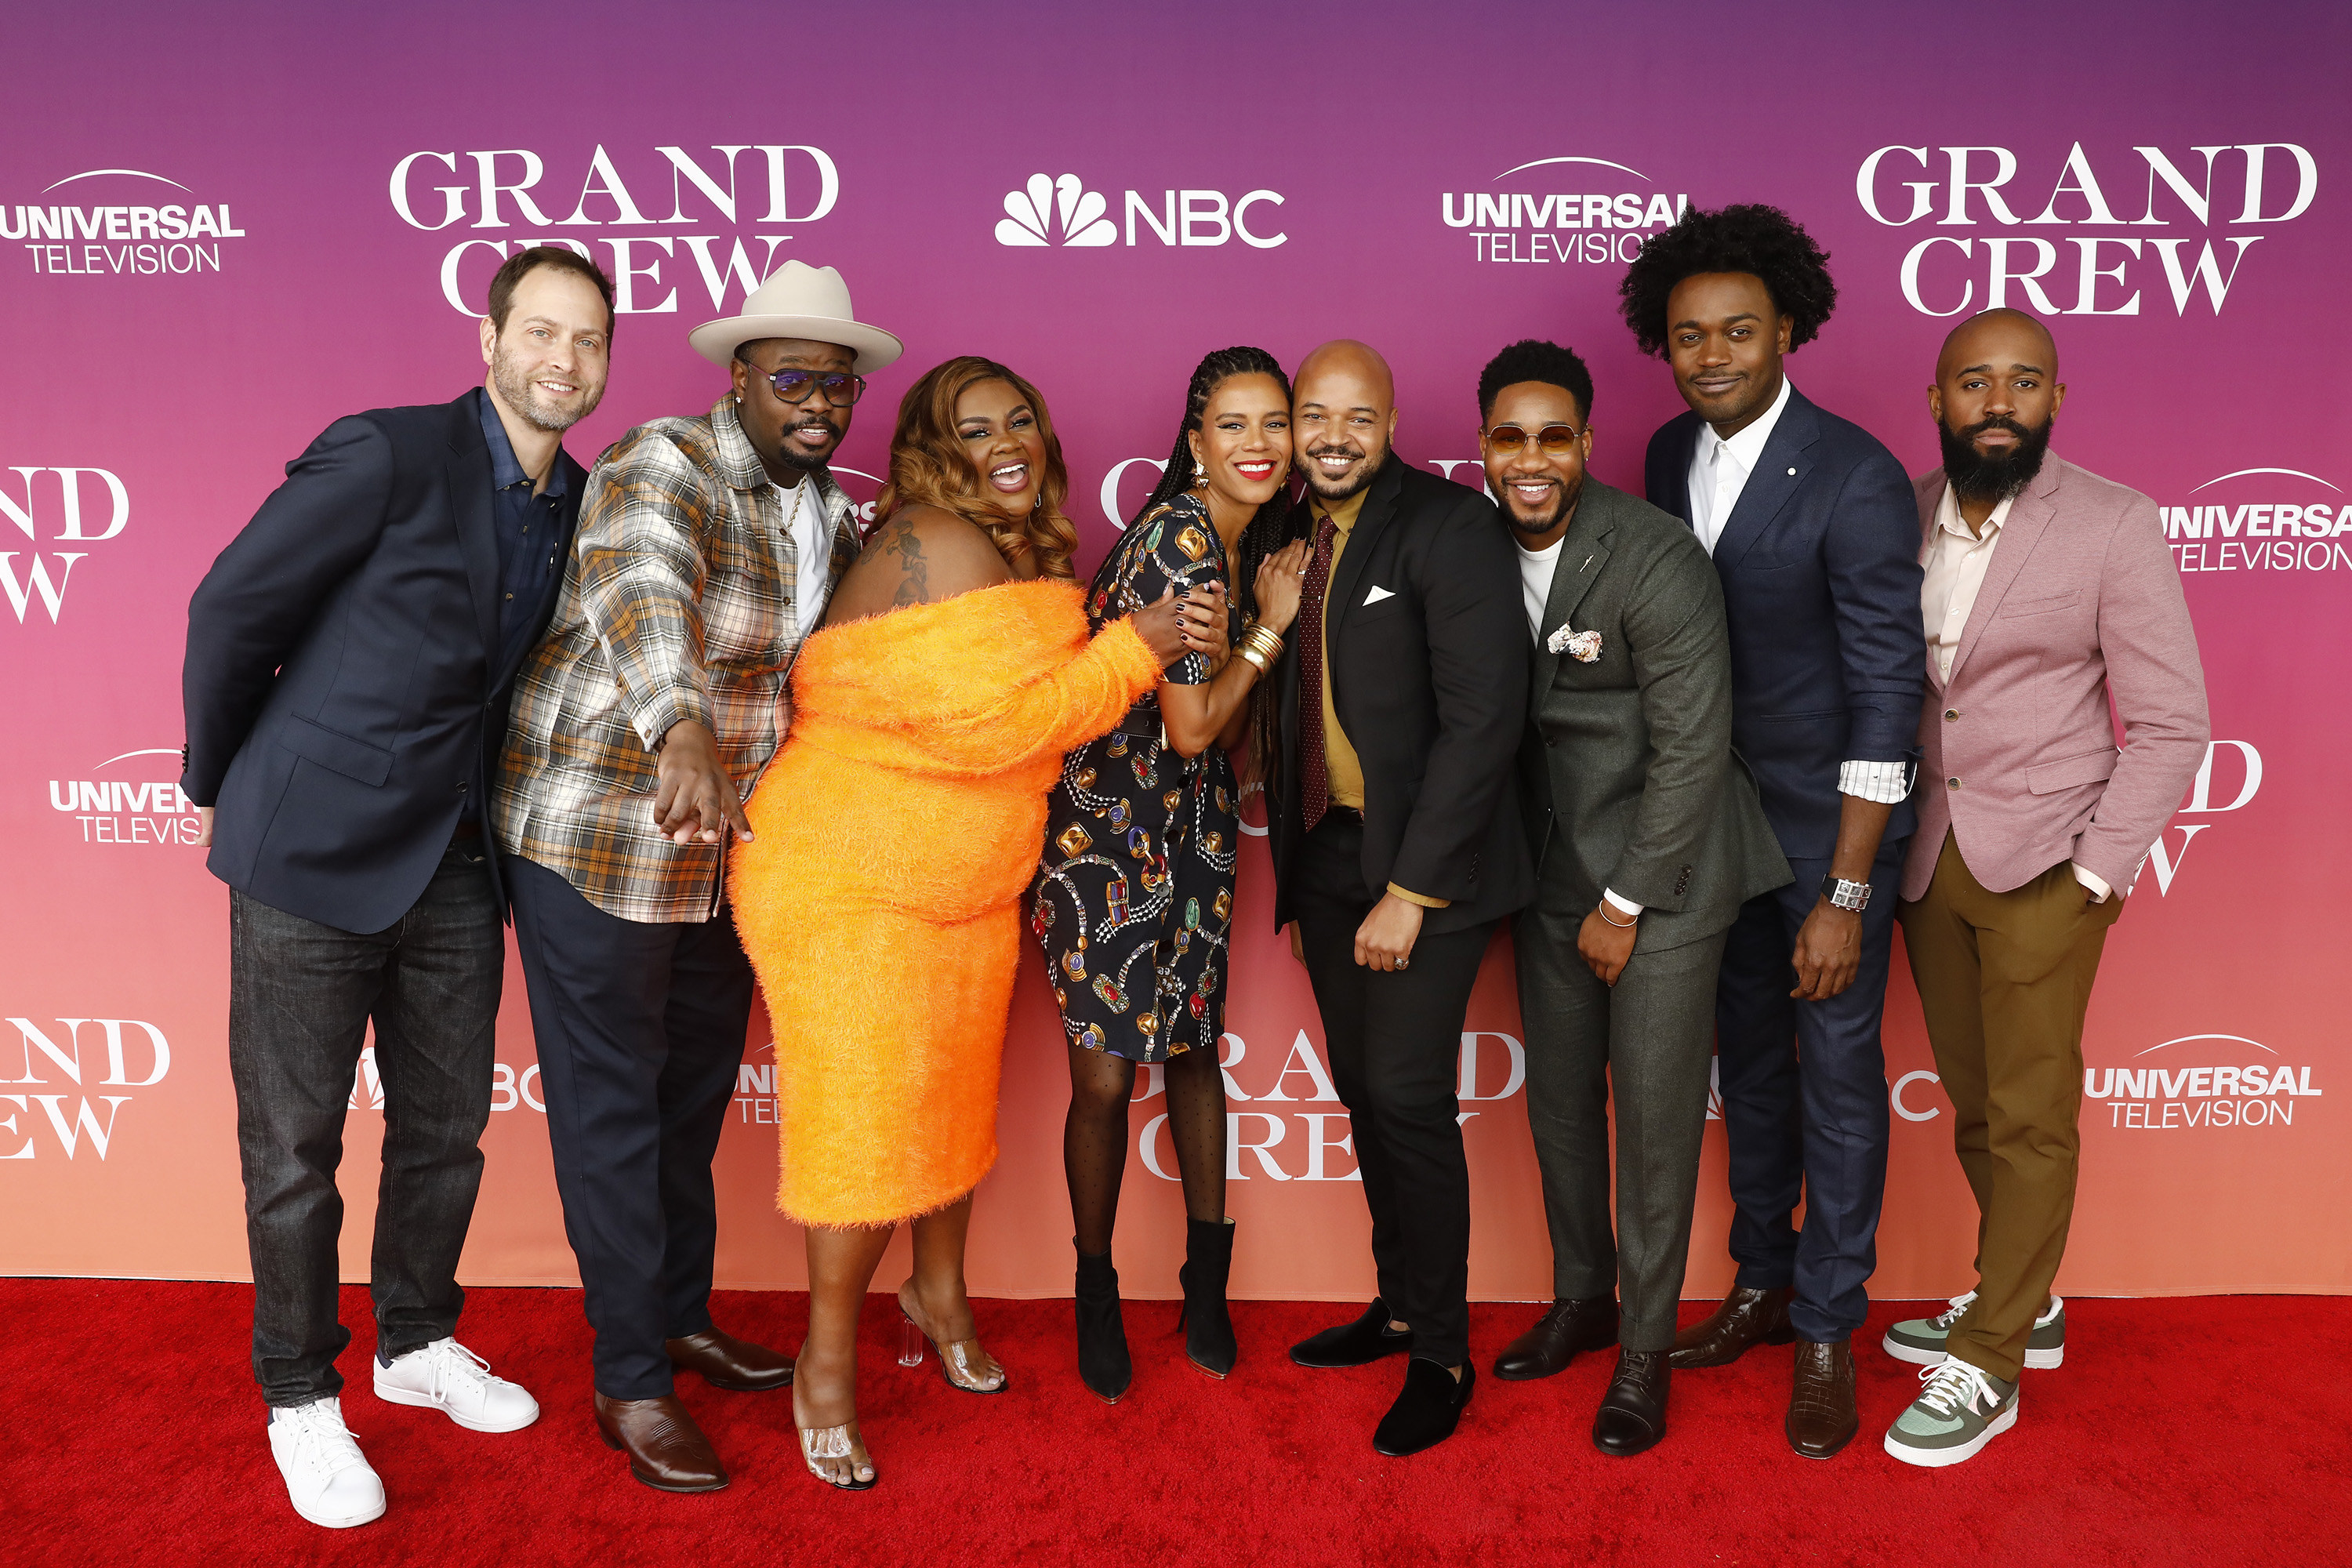 Cast and crew members of &quot;Grand Crew&quot; pose at the premiere of the show